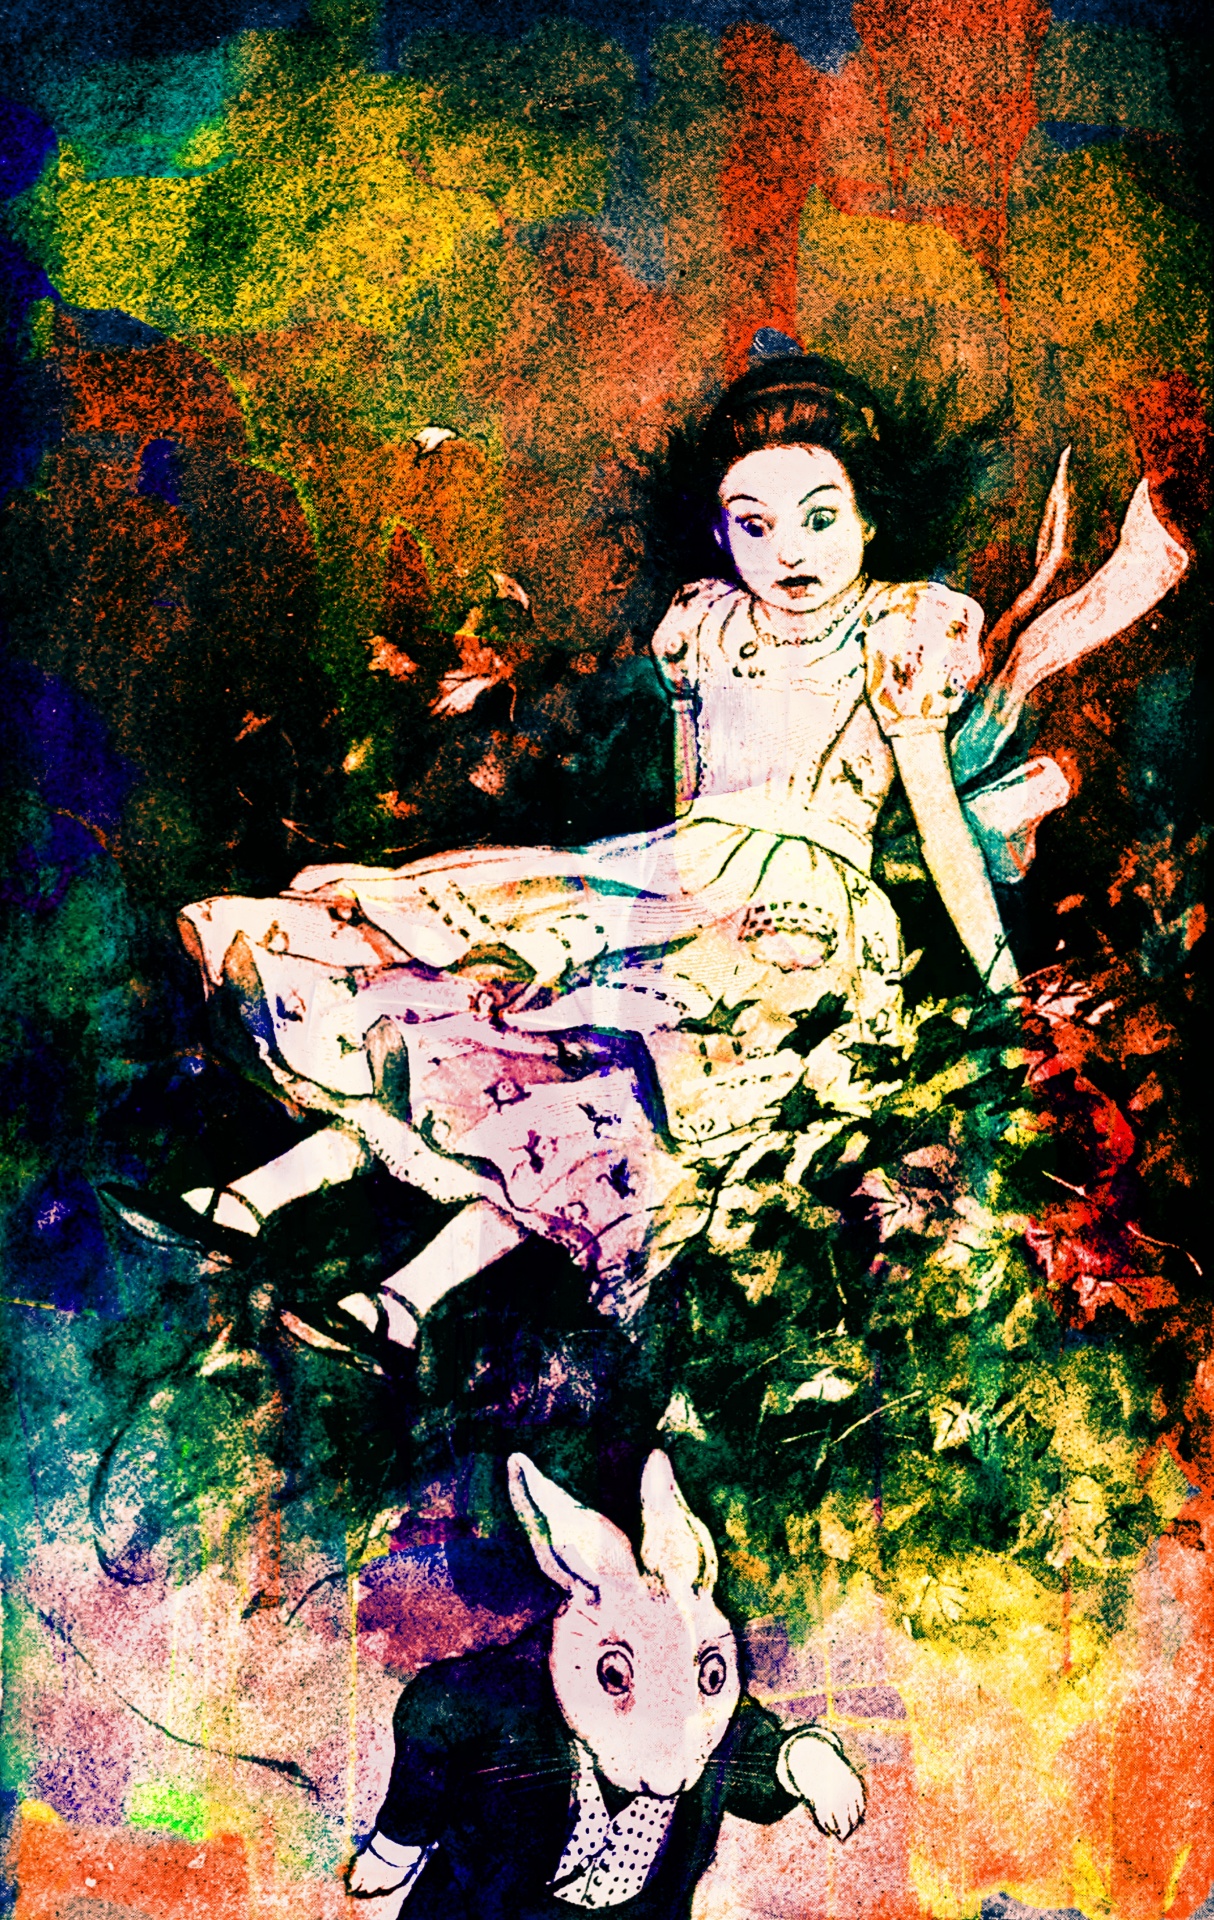 Vintage Alice in Wonderland book illustration with added watercolour ink effects.